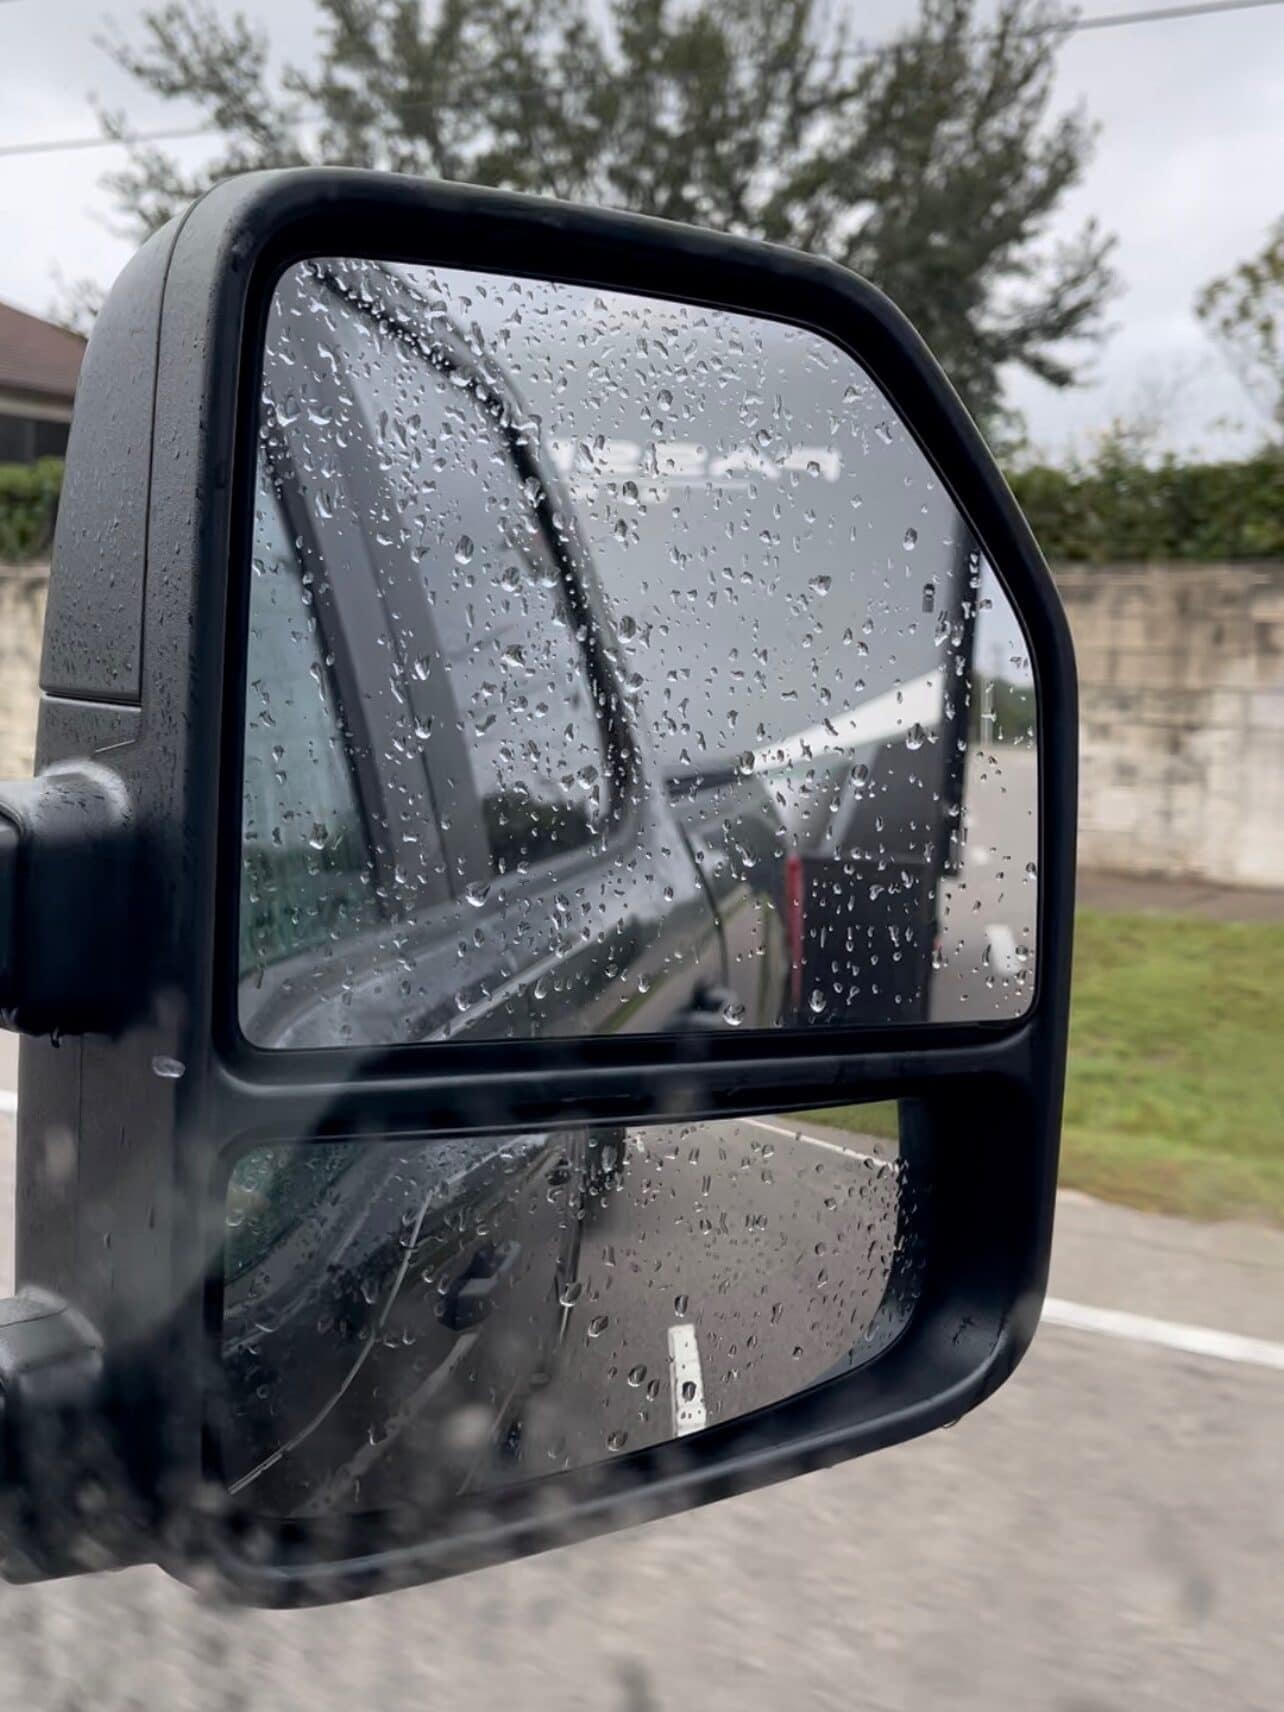 Close-up of a truck side mirror splashed with raindrops